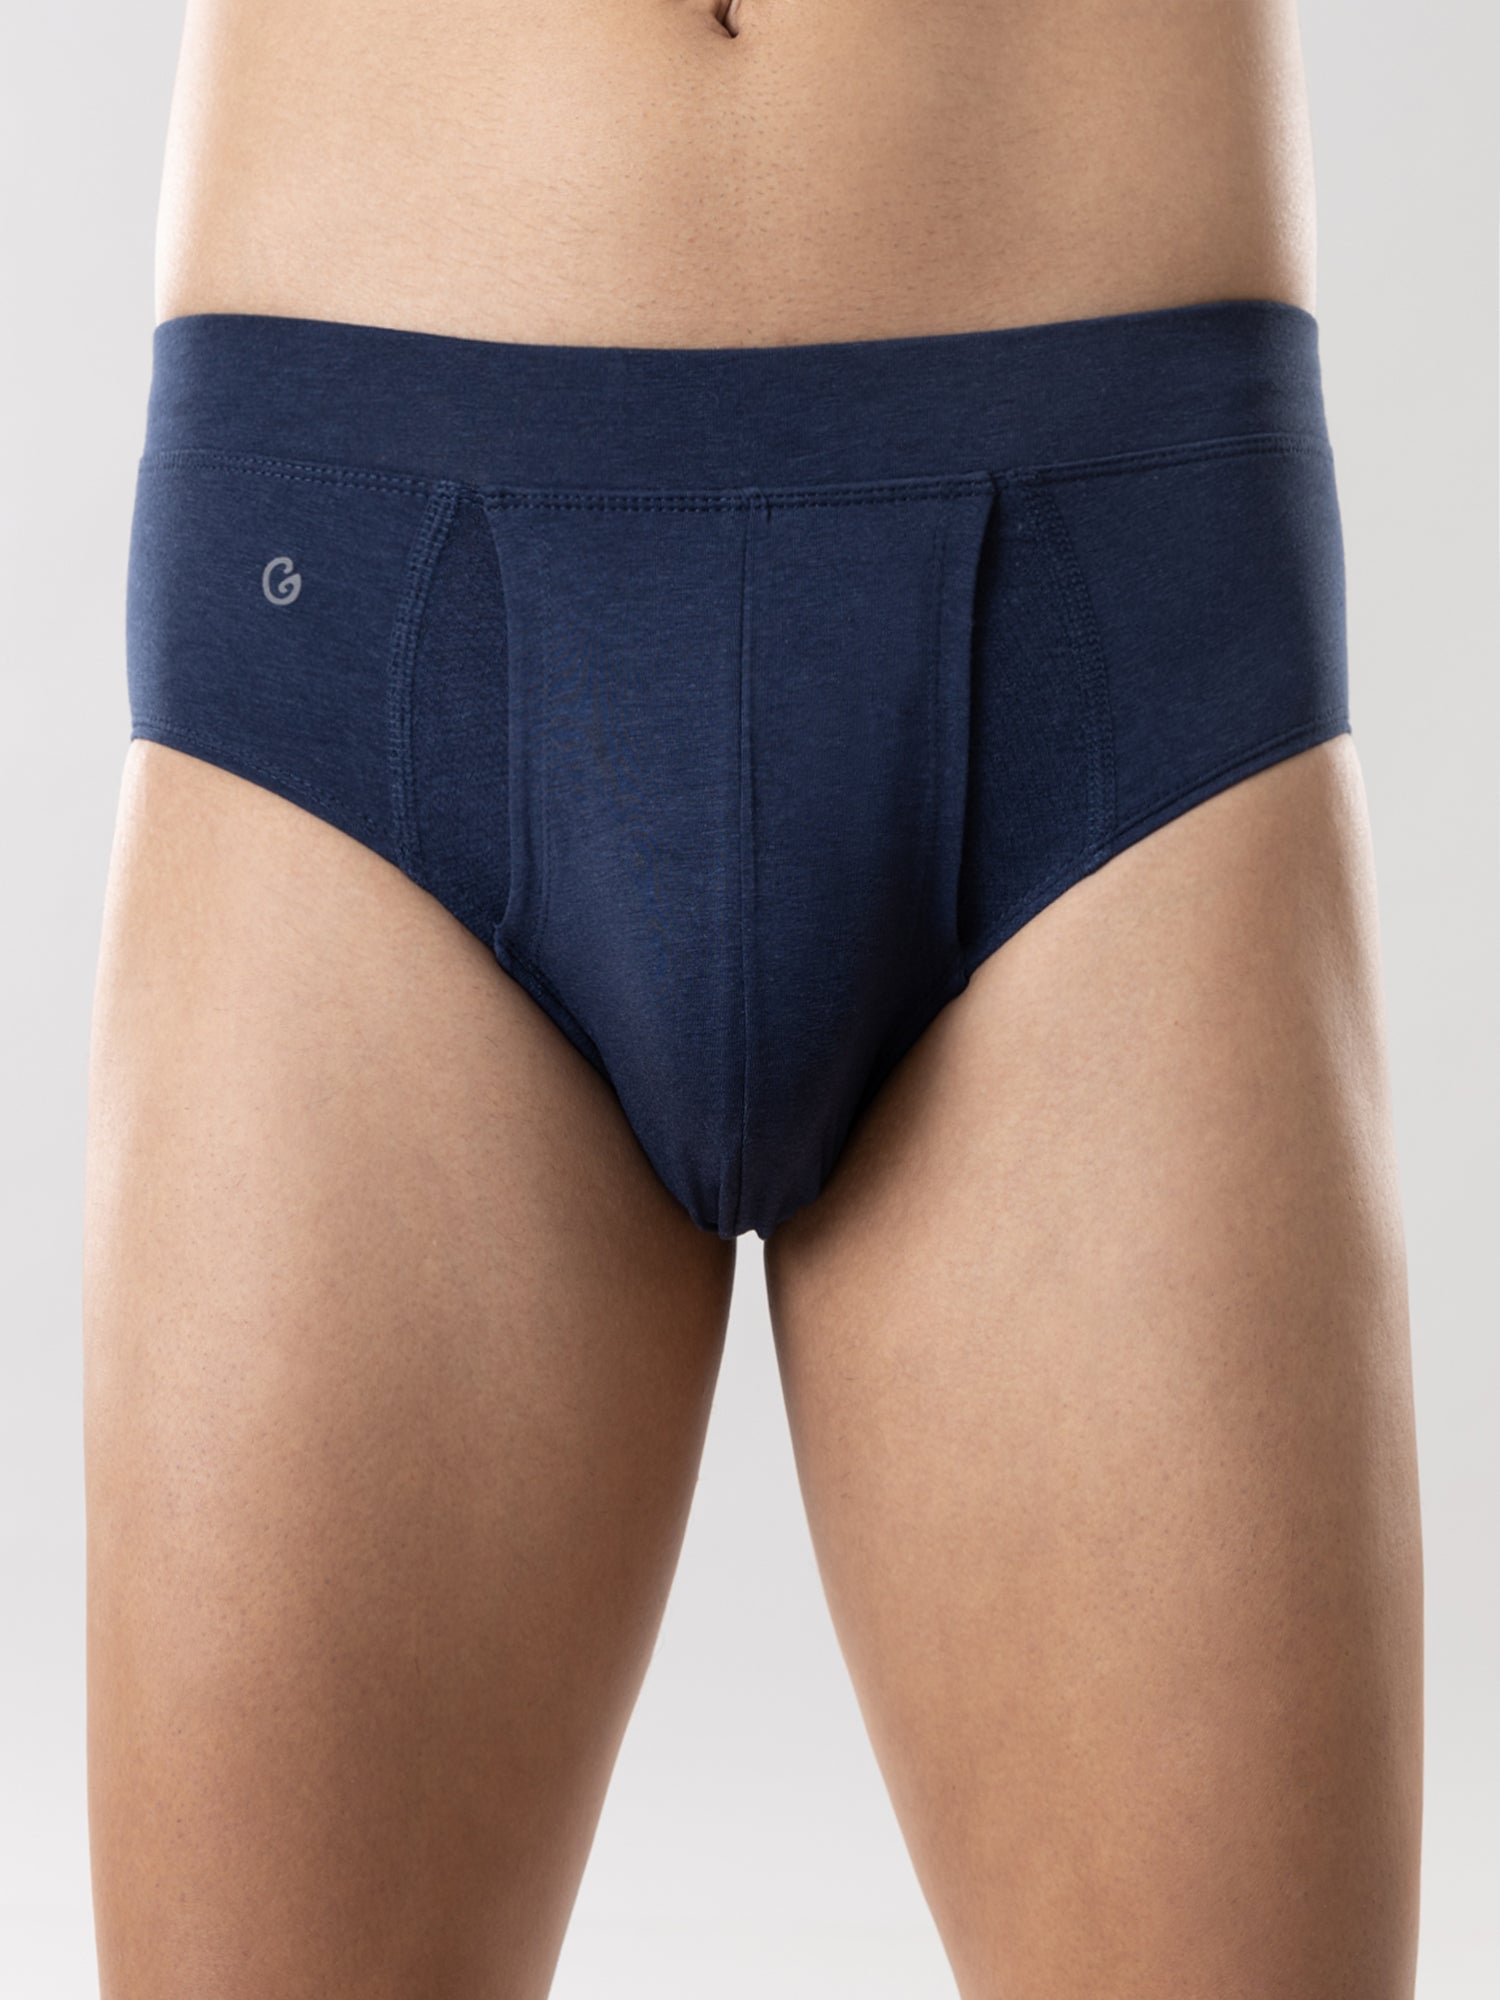 Are Men's Briefs the Best Underwear Choice for Active Lifestyles?, by Amit  Kumar